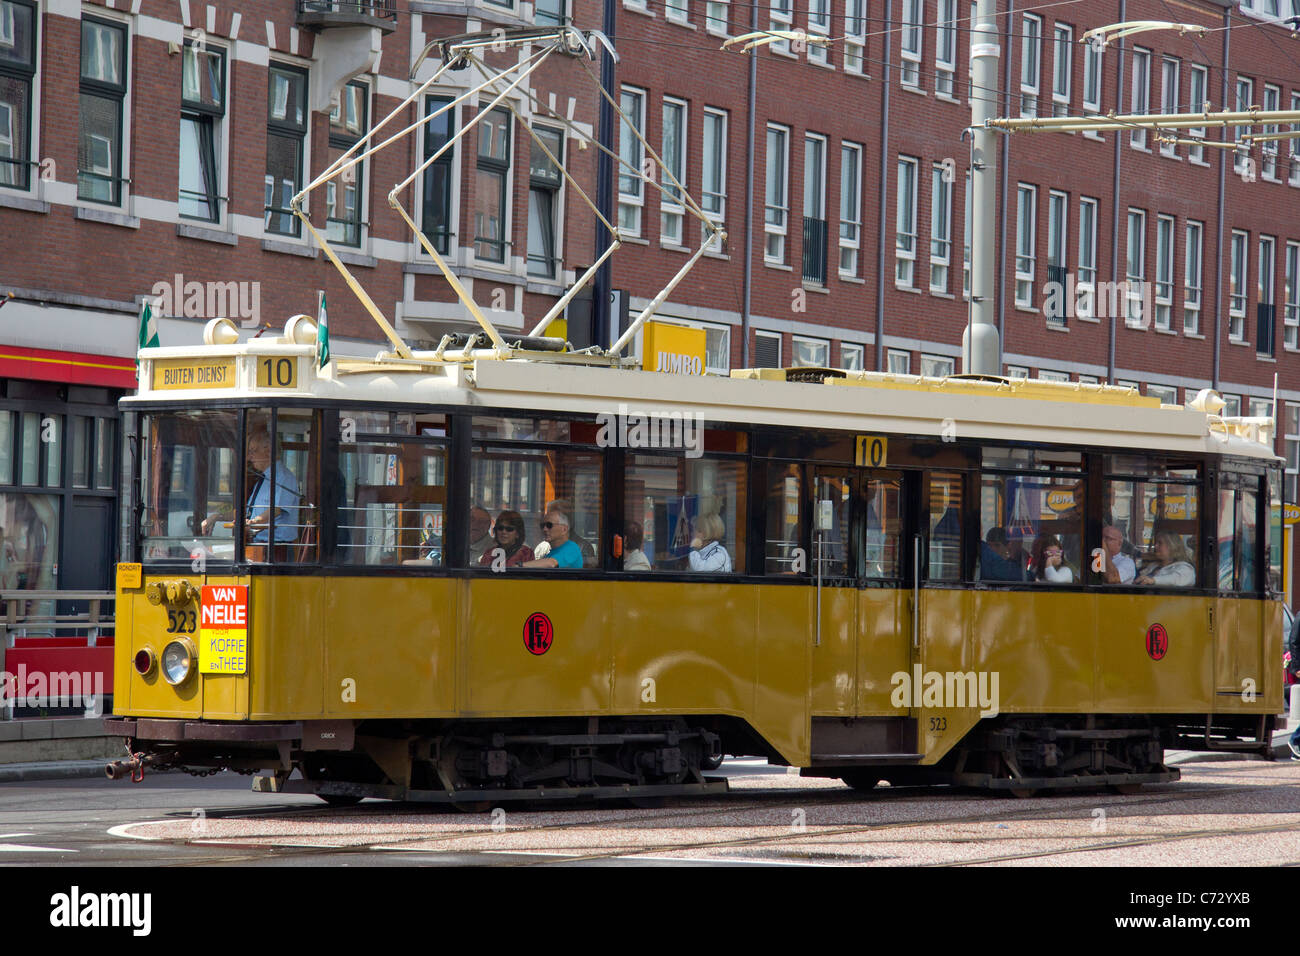 An old traditional streetcar still in operation as a sightseeing tram here on the streets of Delfshaven, Rotterdam Stock Photo